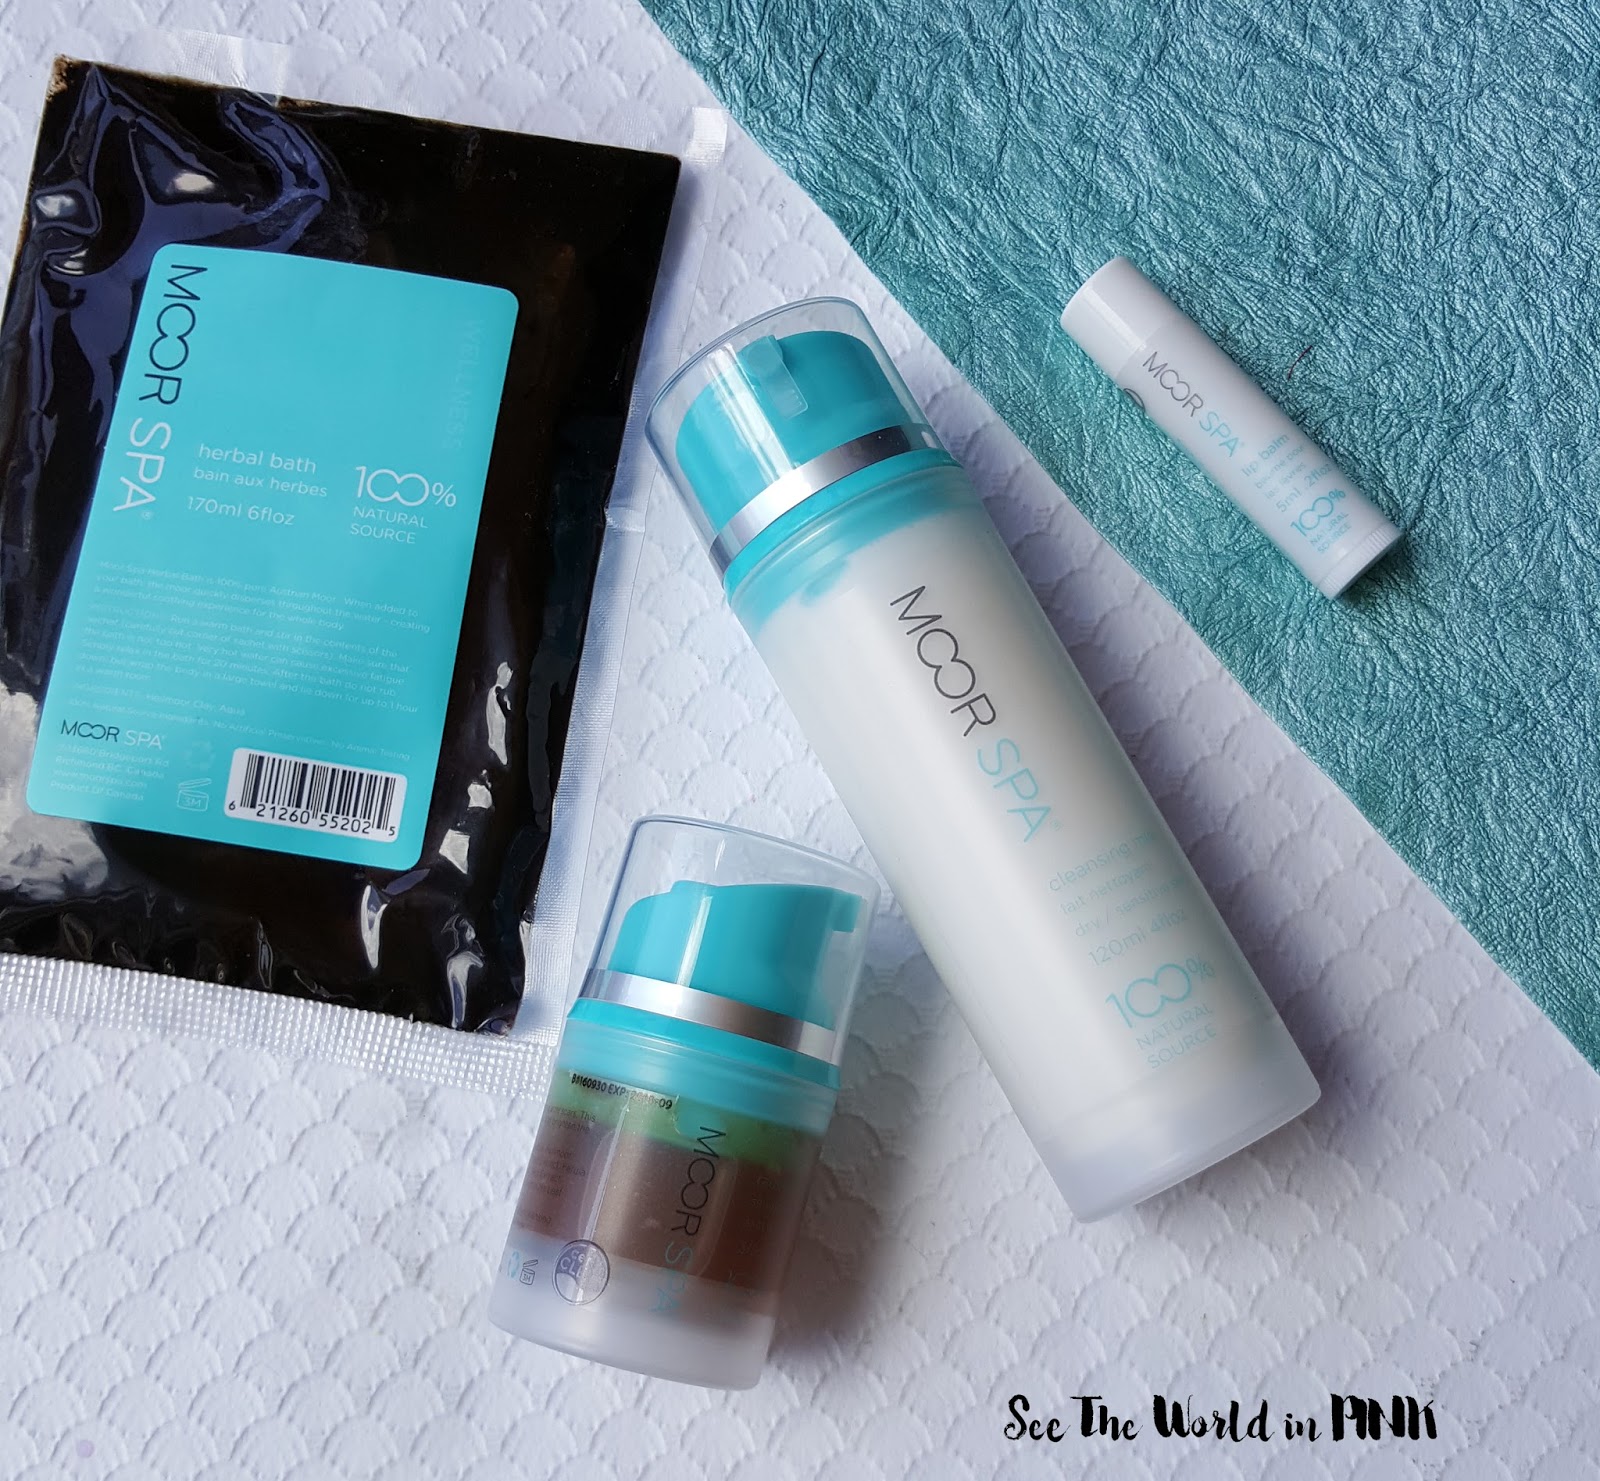 Skincare Sunday - Moor Spa Skincare and Bath Product Reviews! 